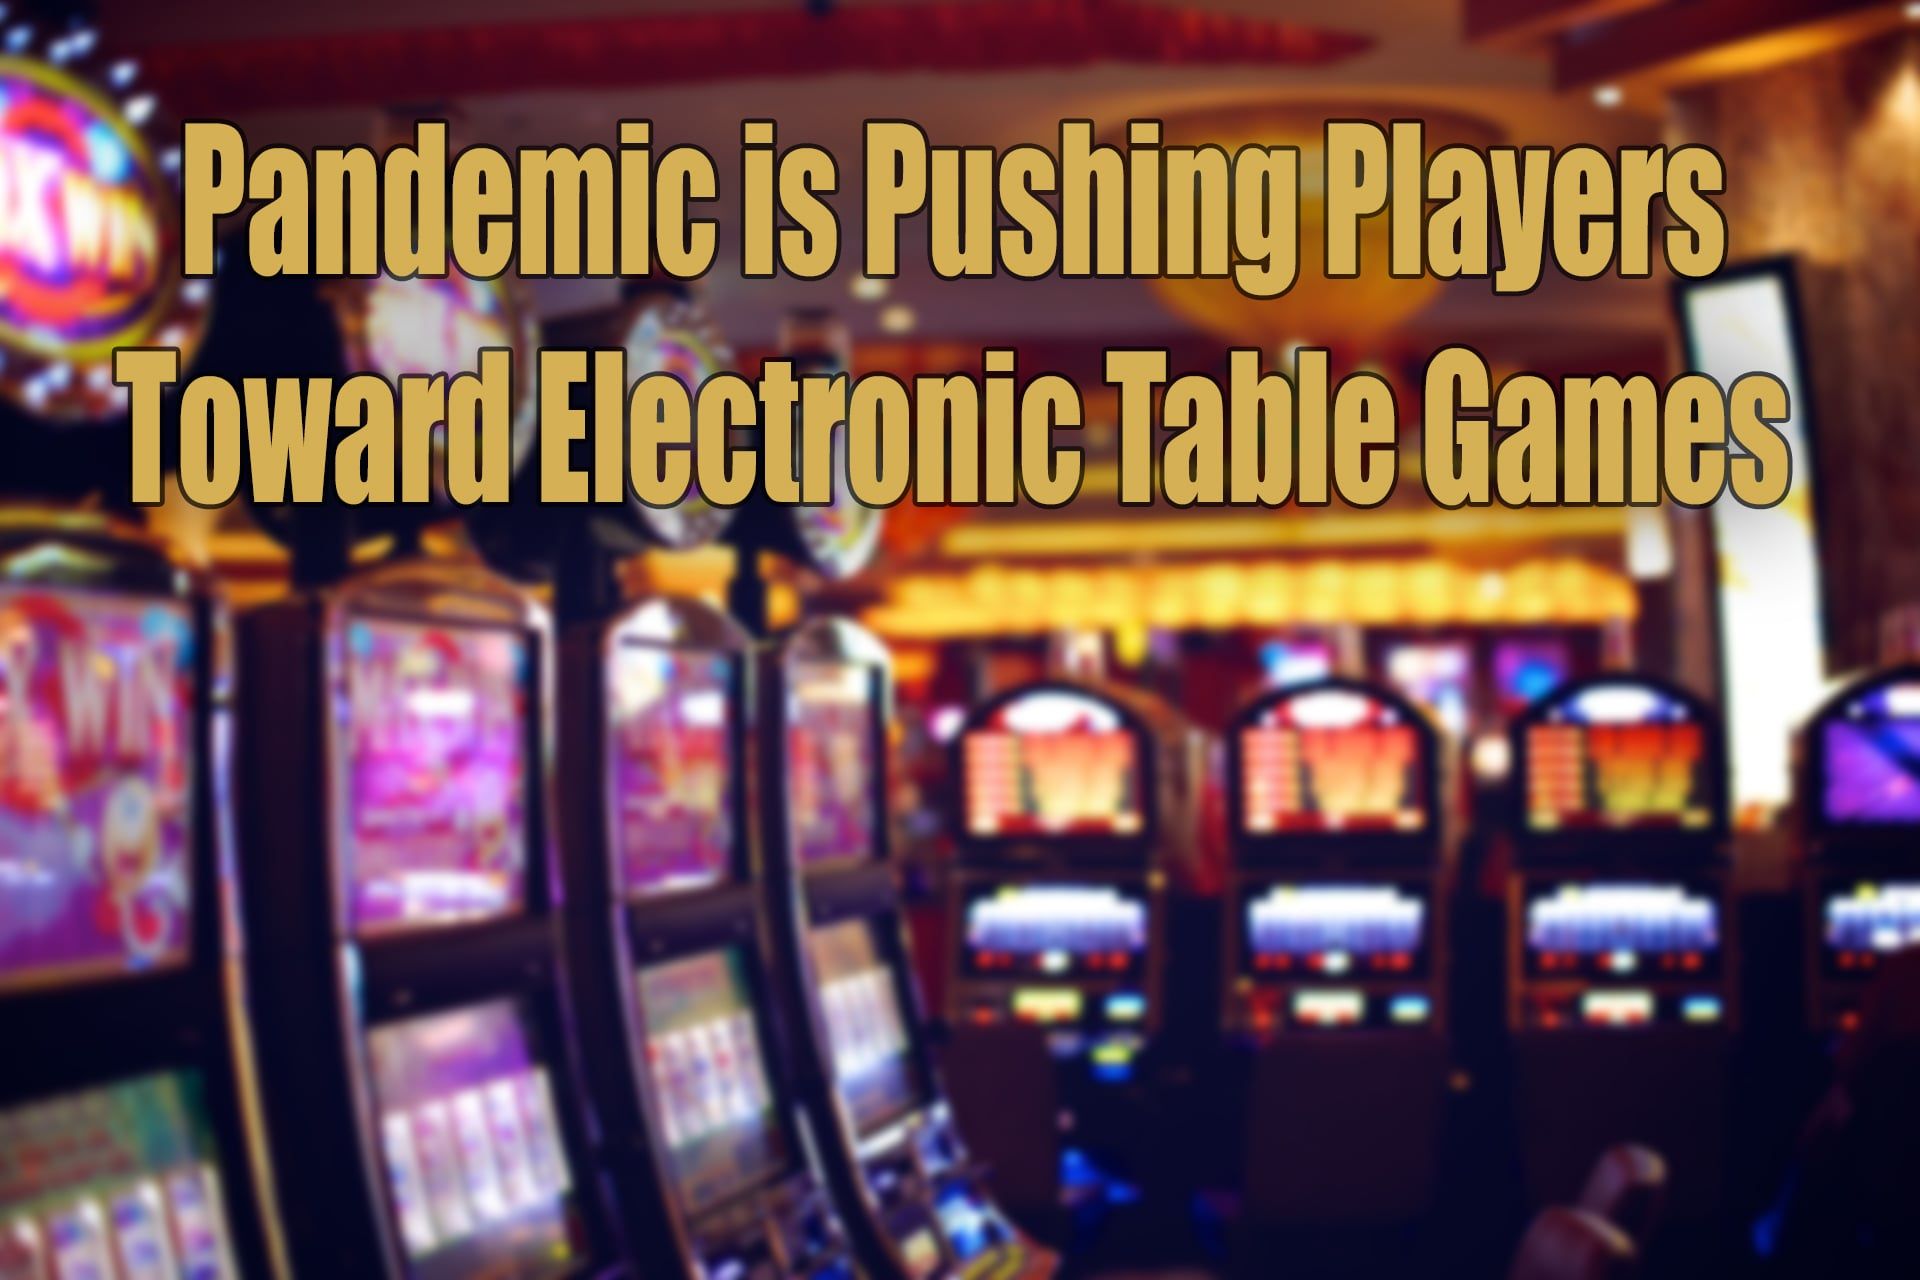 Electronic Table Game.jpg